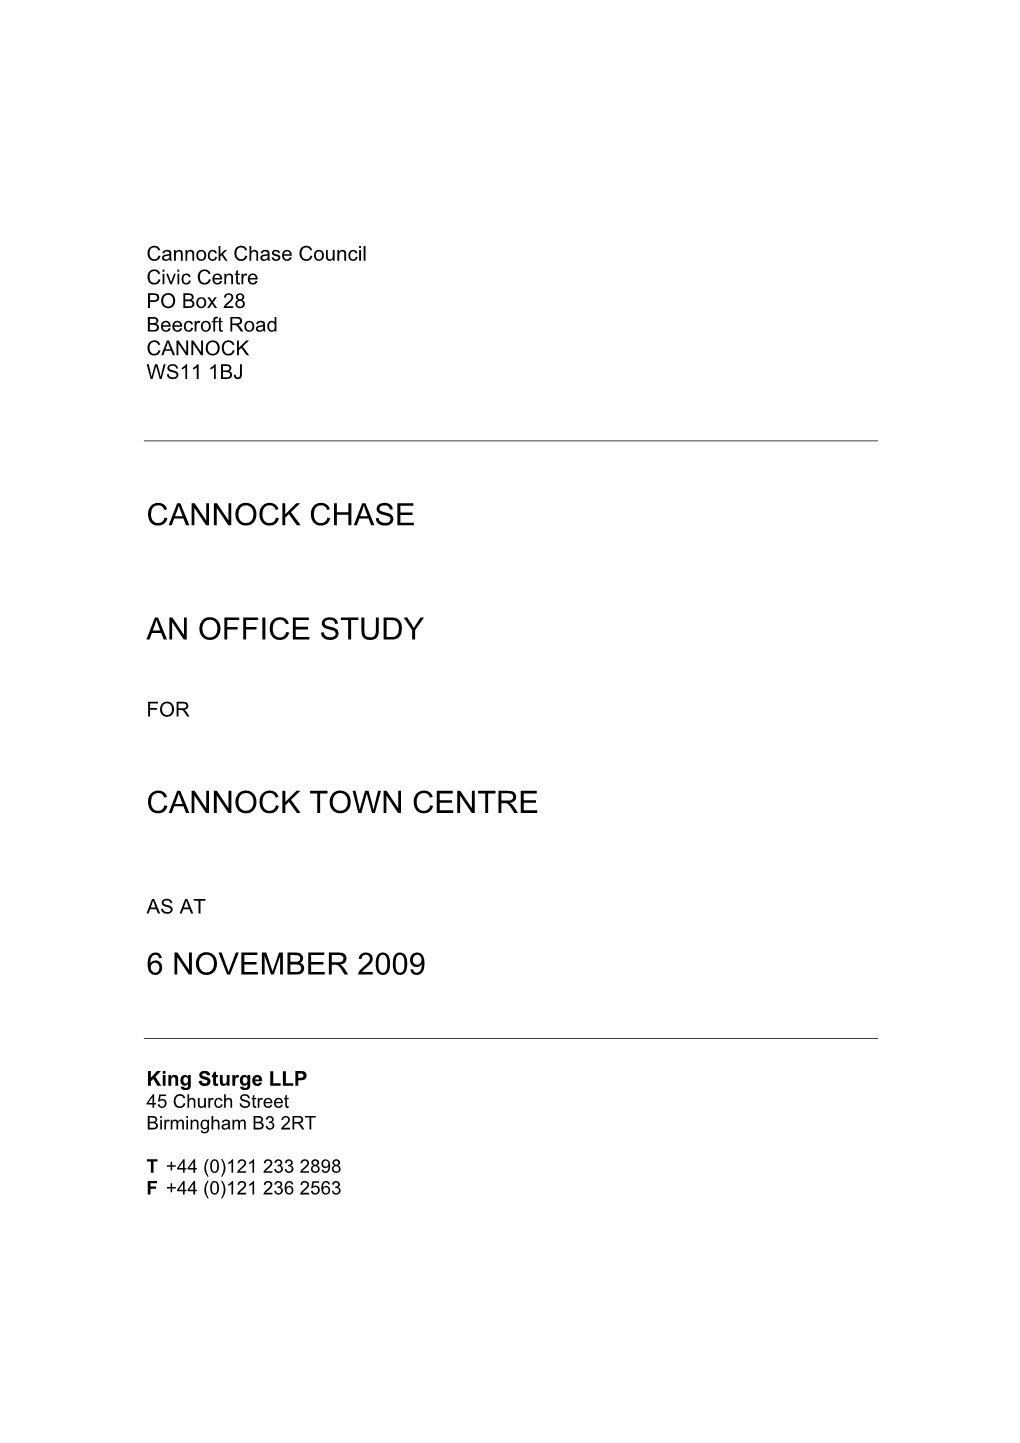 Offices Study for Cannock Town Centre